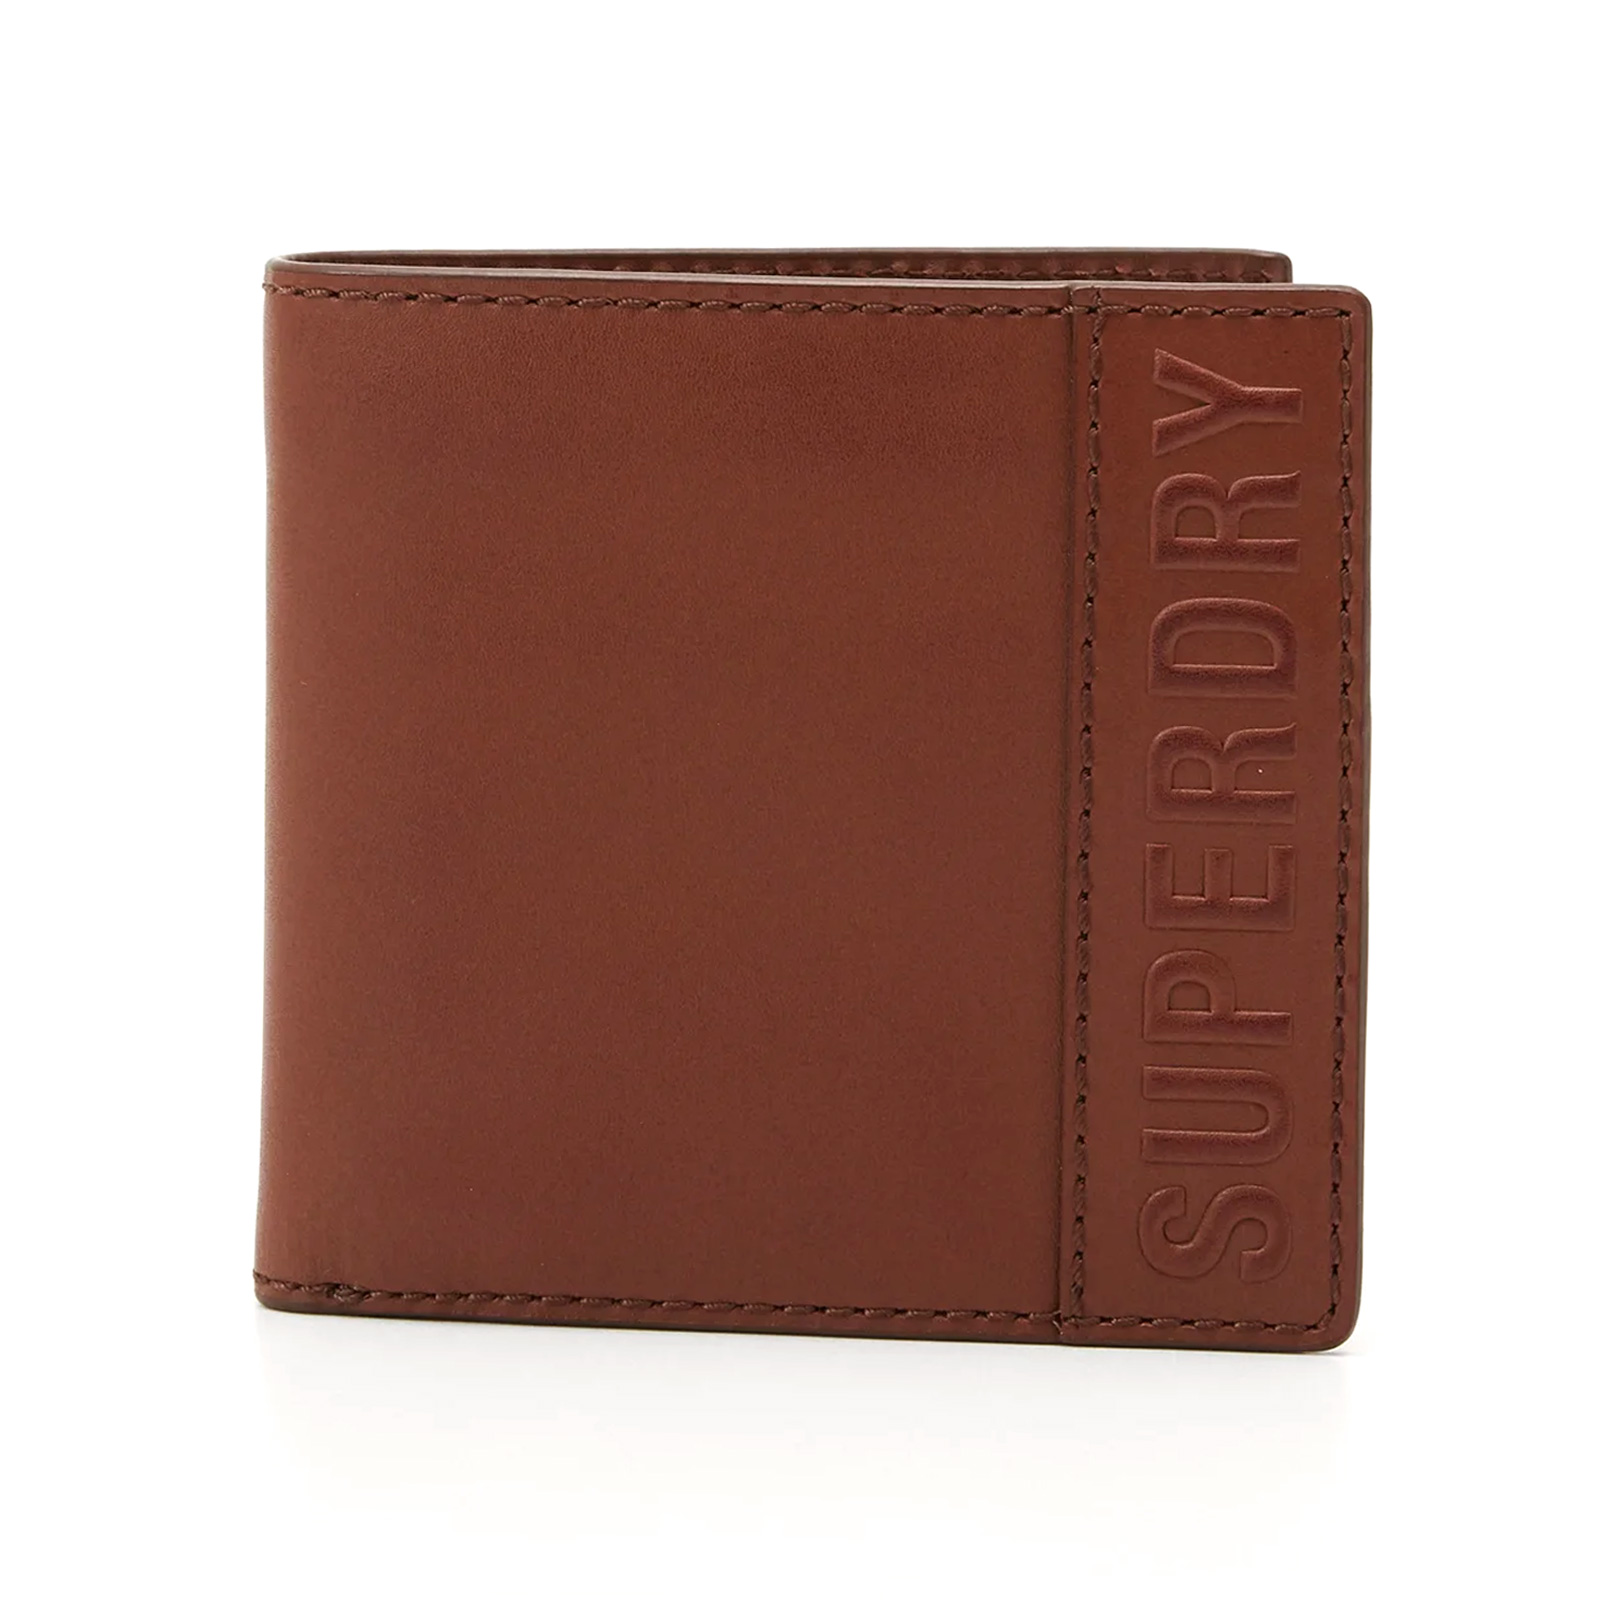 Superdry - VERMONT BIFOLD LEATHER WALLET - TAN